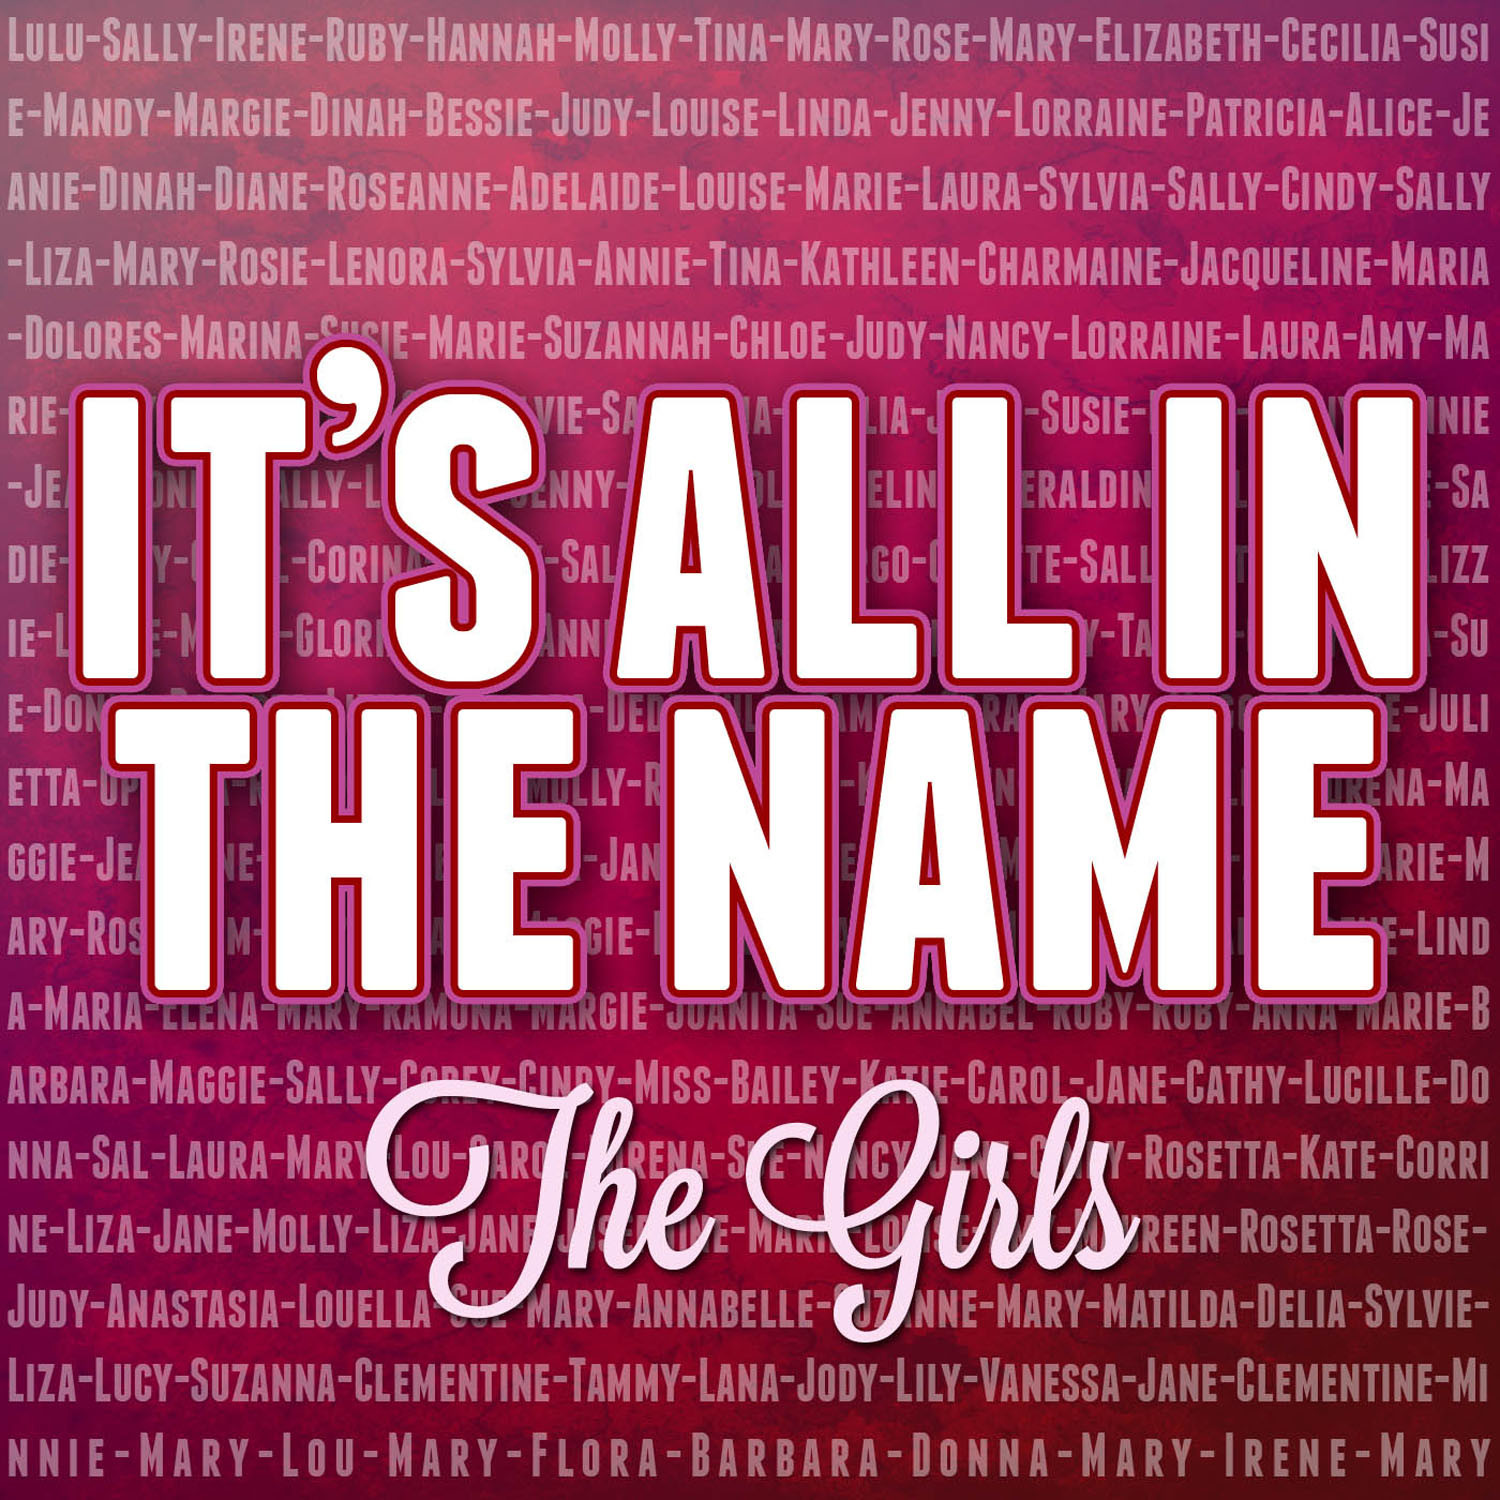 It's All in the Name - the Girls